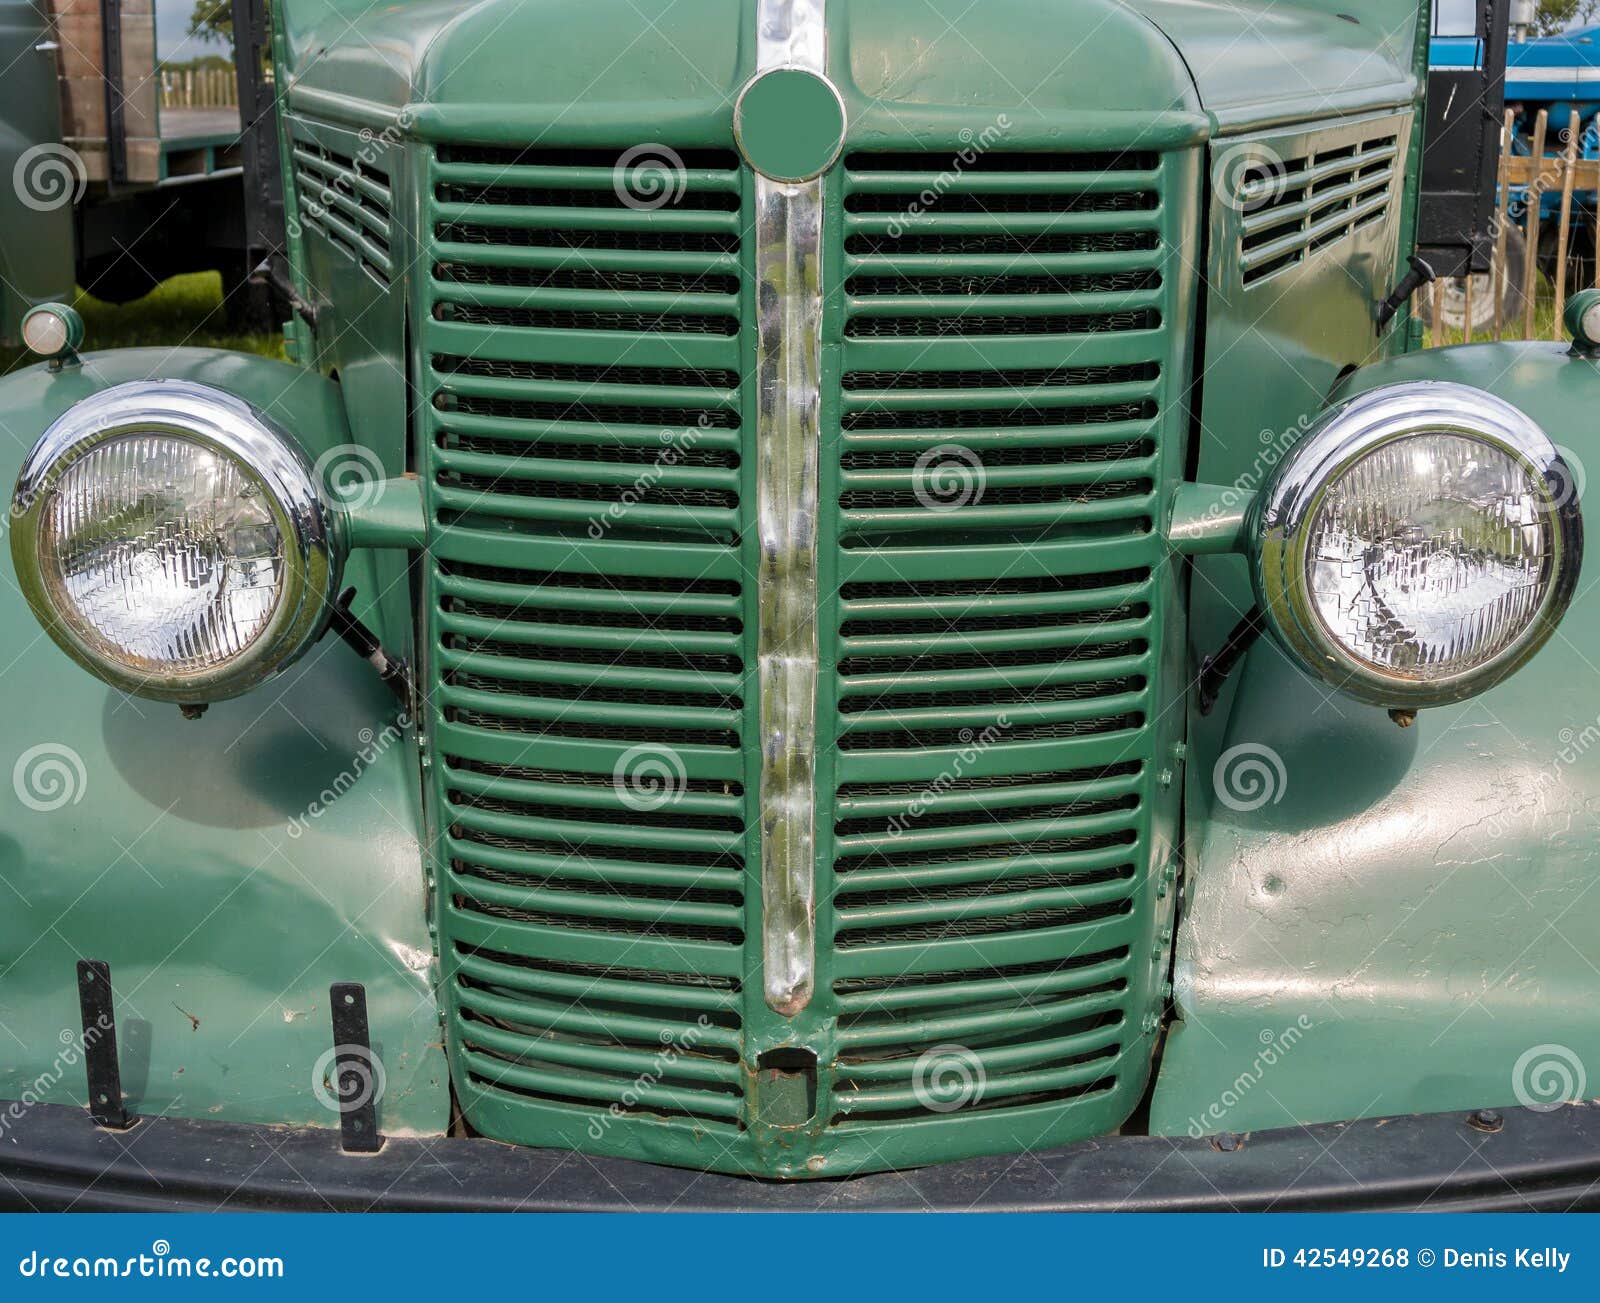 Bedford Van Photos - Free & Royalty-Free Stock Photos from Dreamstime